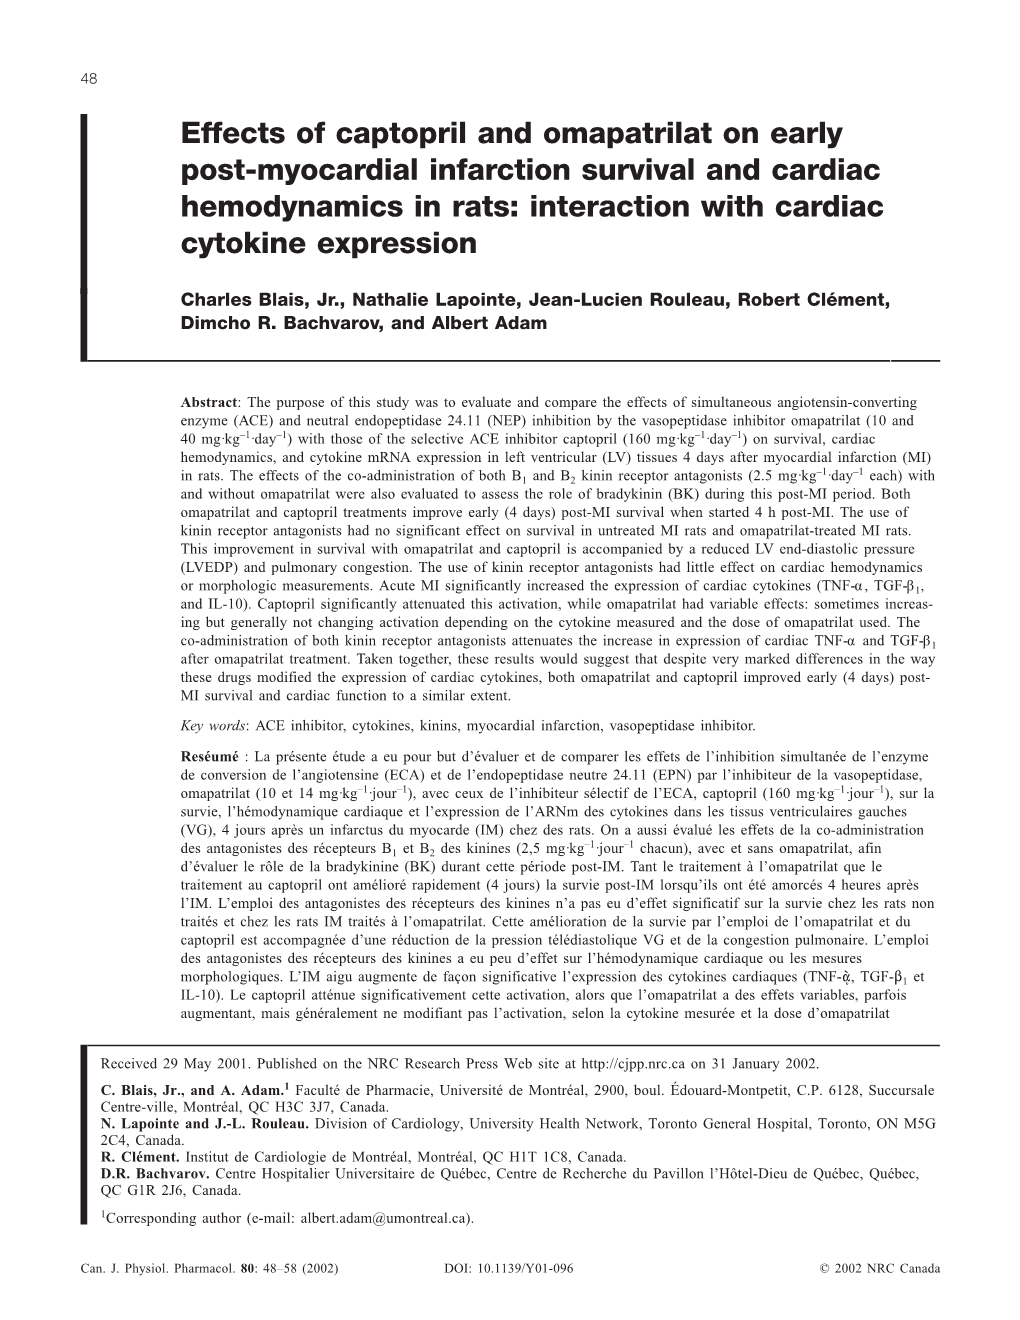 Effects of Captopril and Omapatrilat on Early Post-Myocardial Infarction Survival and Cardiac Hemodynamics in Rats: Interaction with Cardiac Cytokine Expression